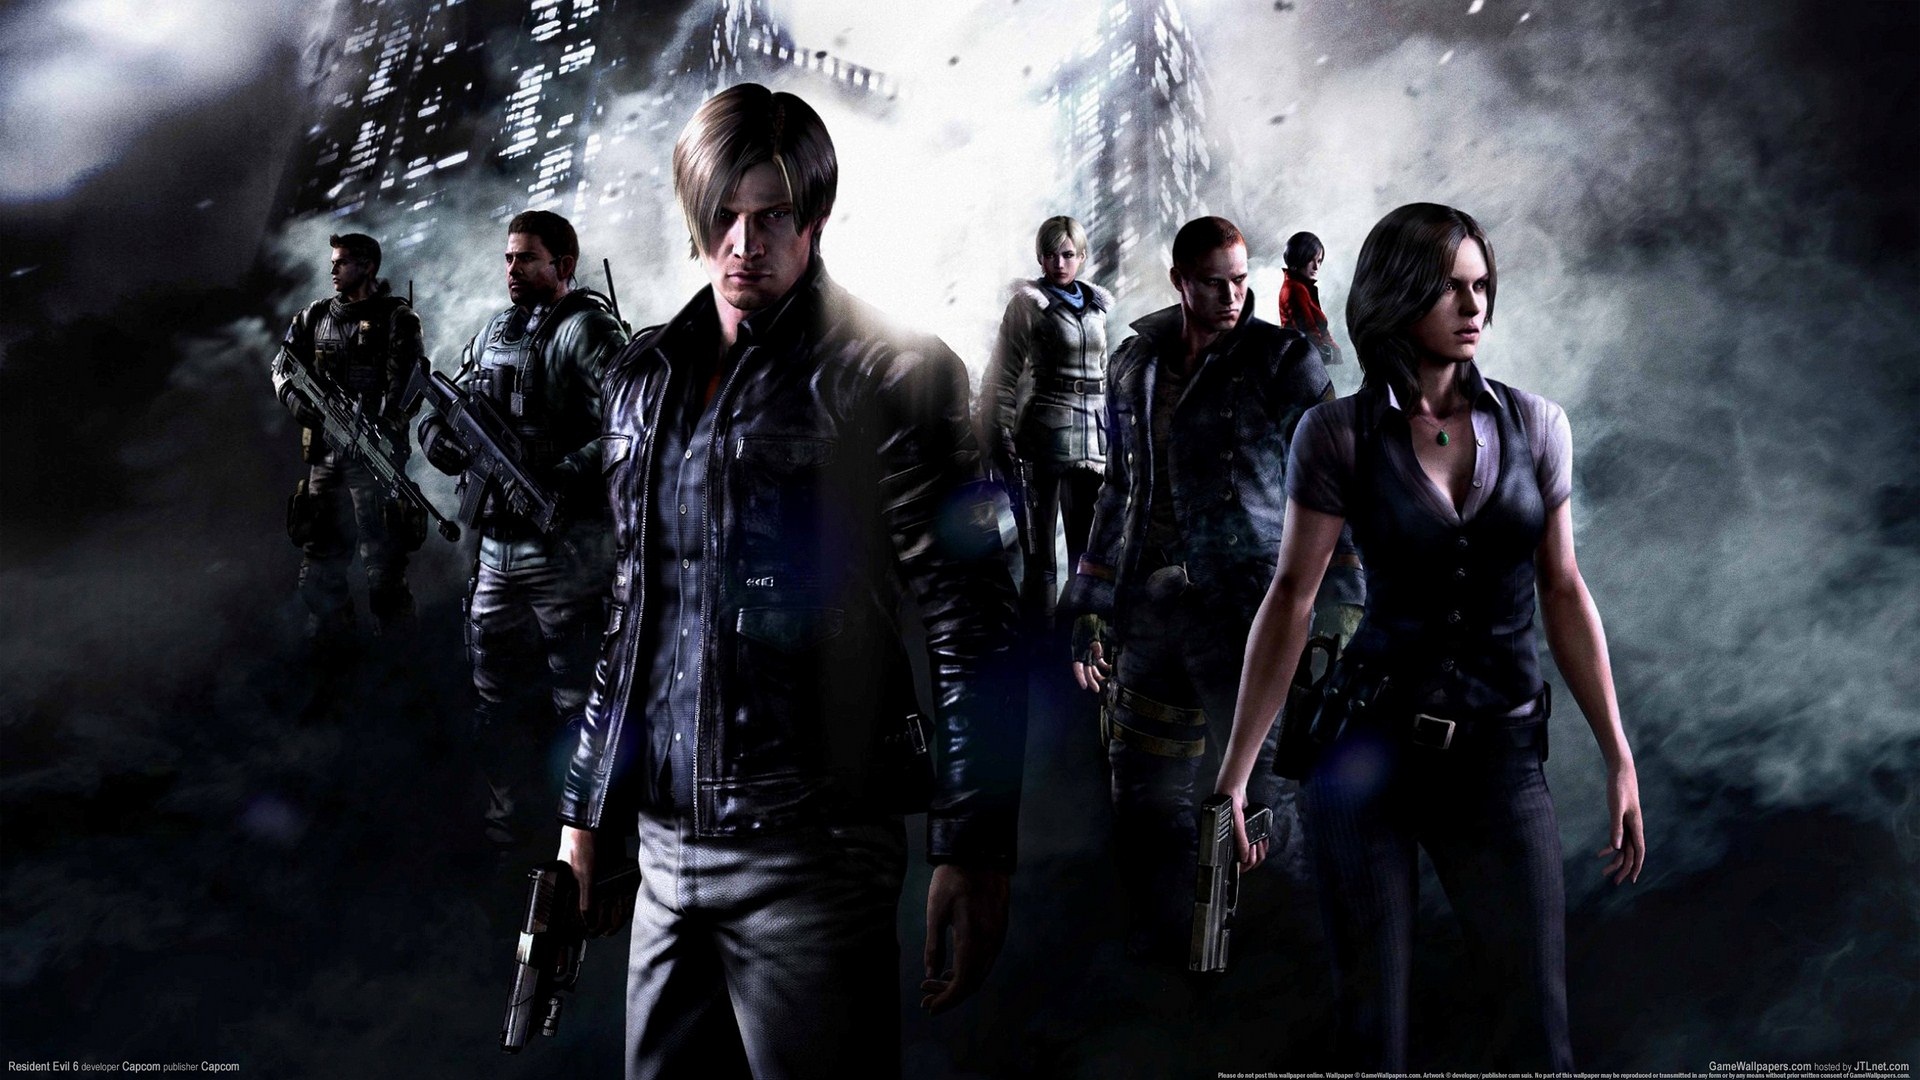 Resident Evil 6 HD game wallpapers #1 - 1920x1080